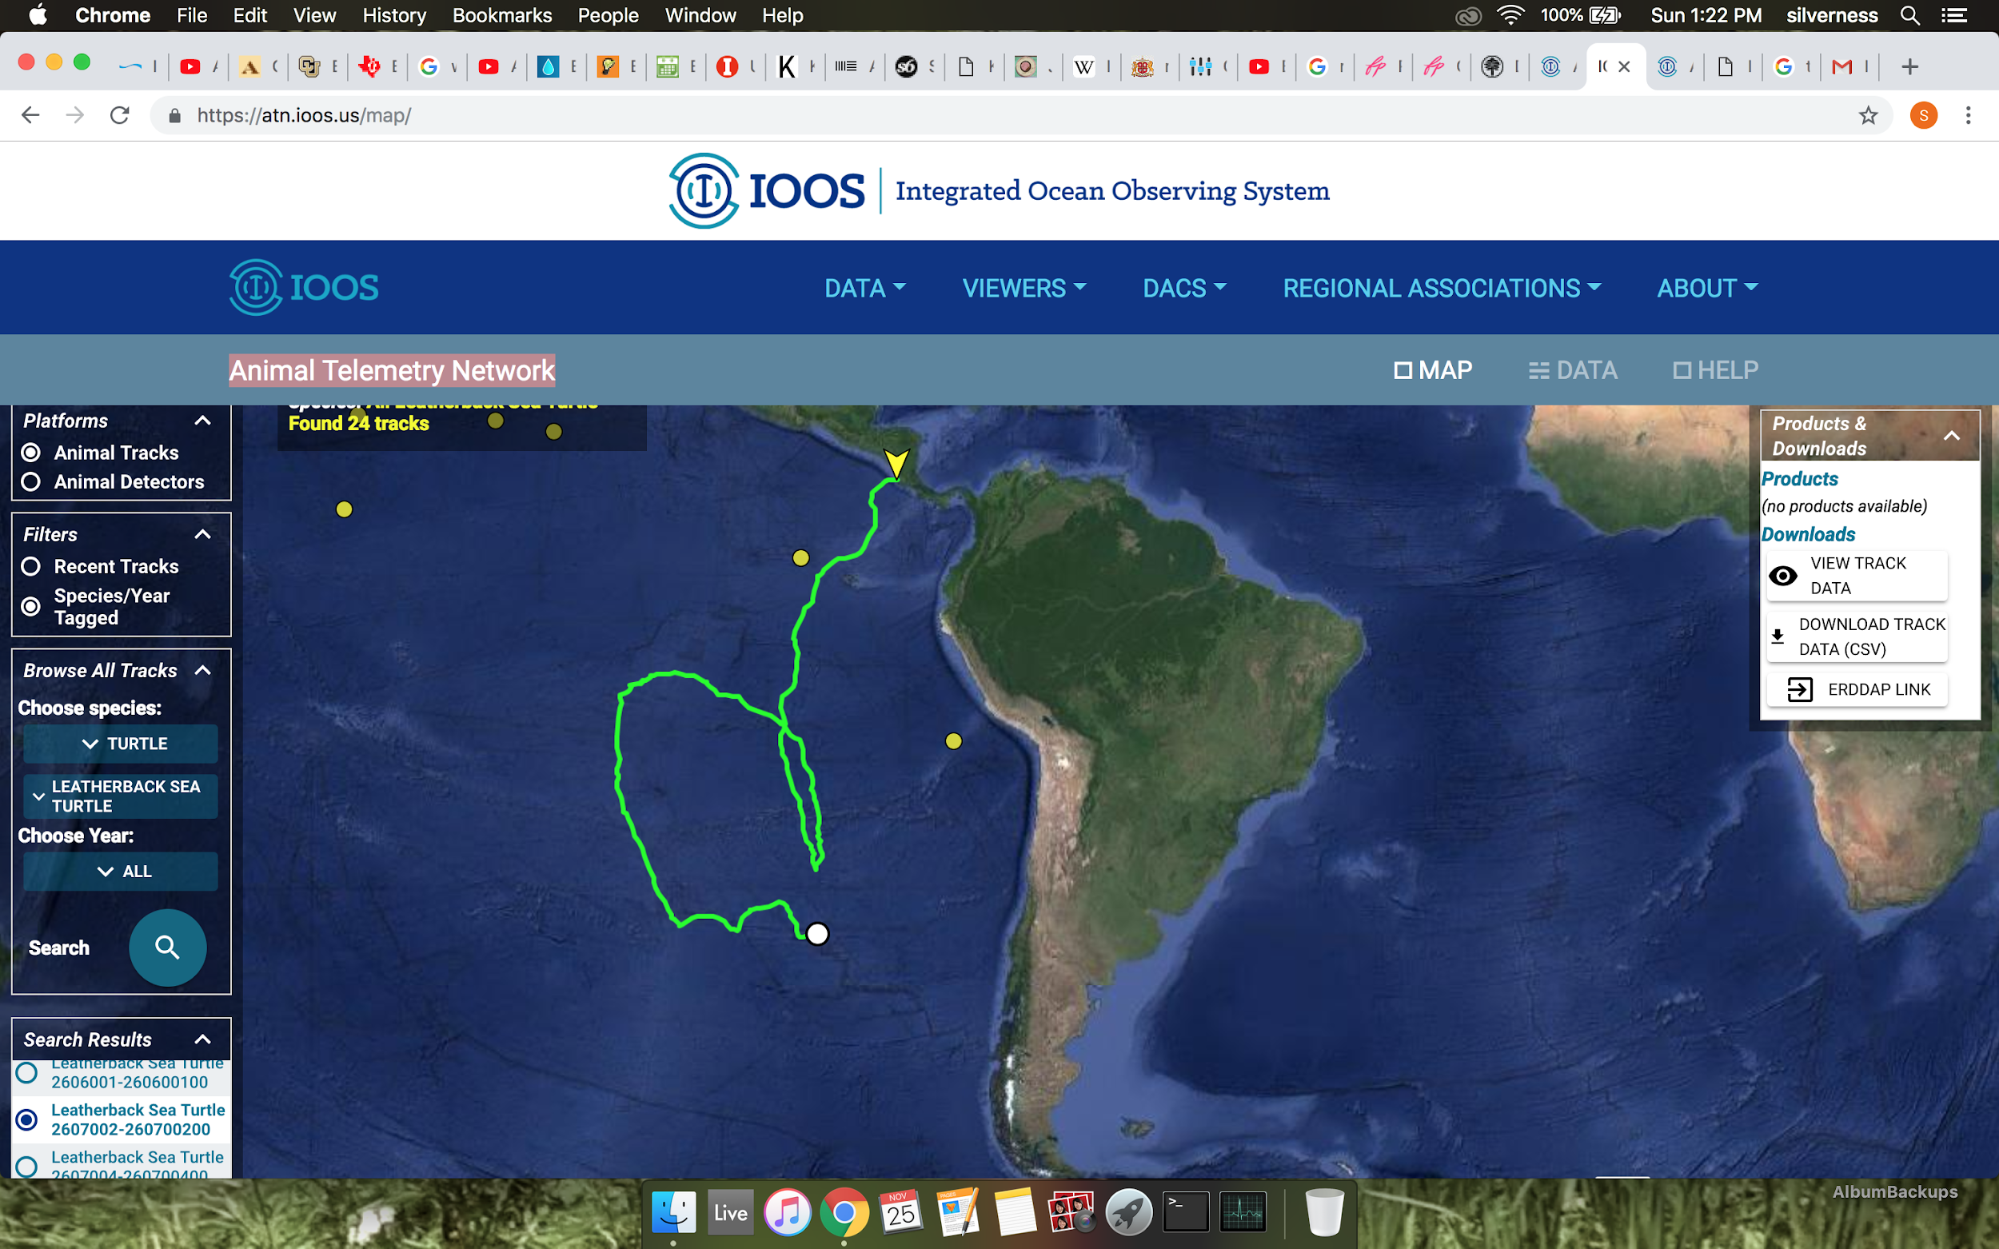 A screenshot of the Integrated Ocean Observing System website showing the turtle track data